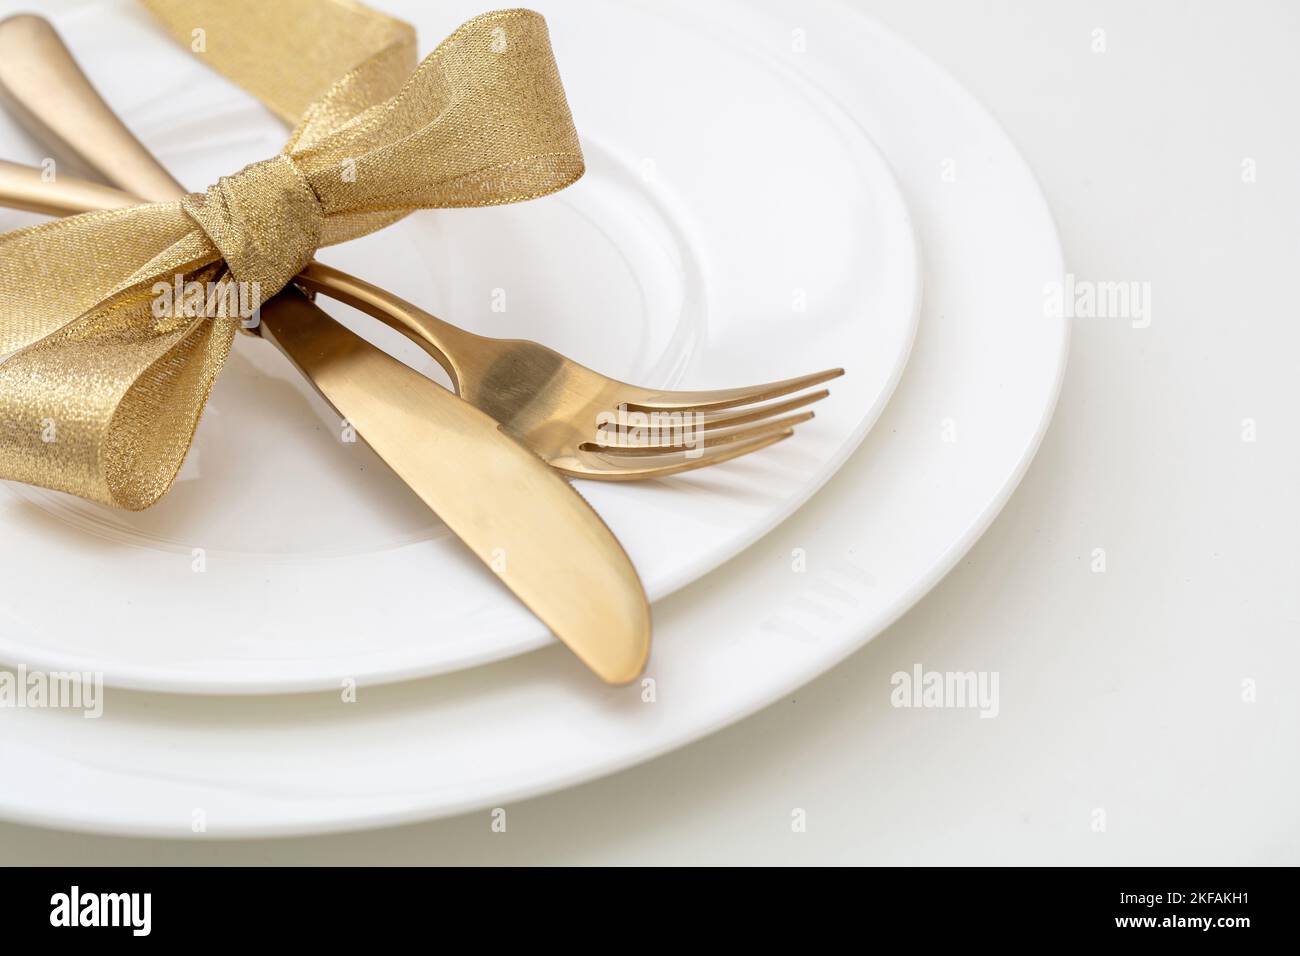 Christmas table setting close up view. Gold cutlery and decoration on white dishes, Elegant restaurant, celebration dinner Stock Photo